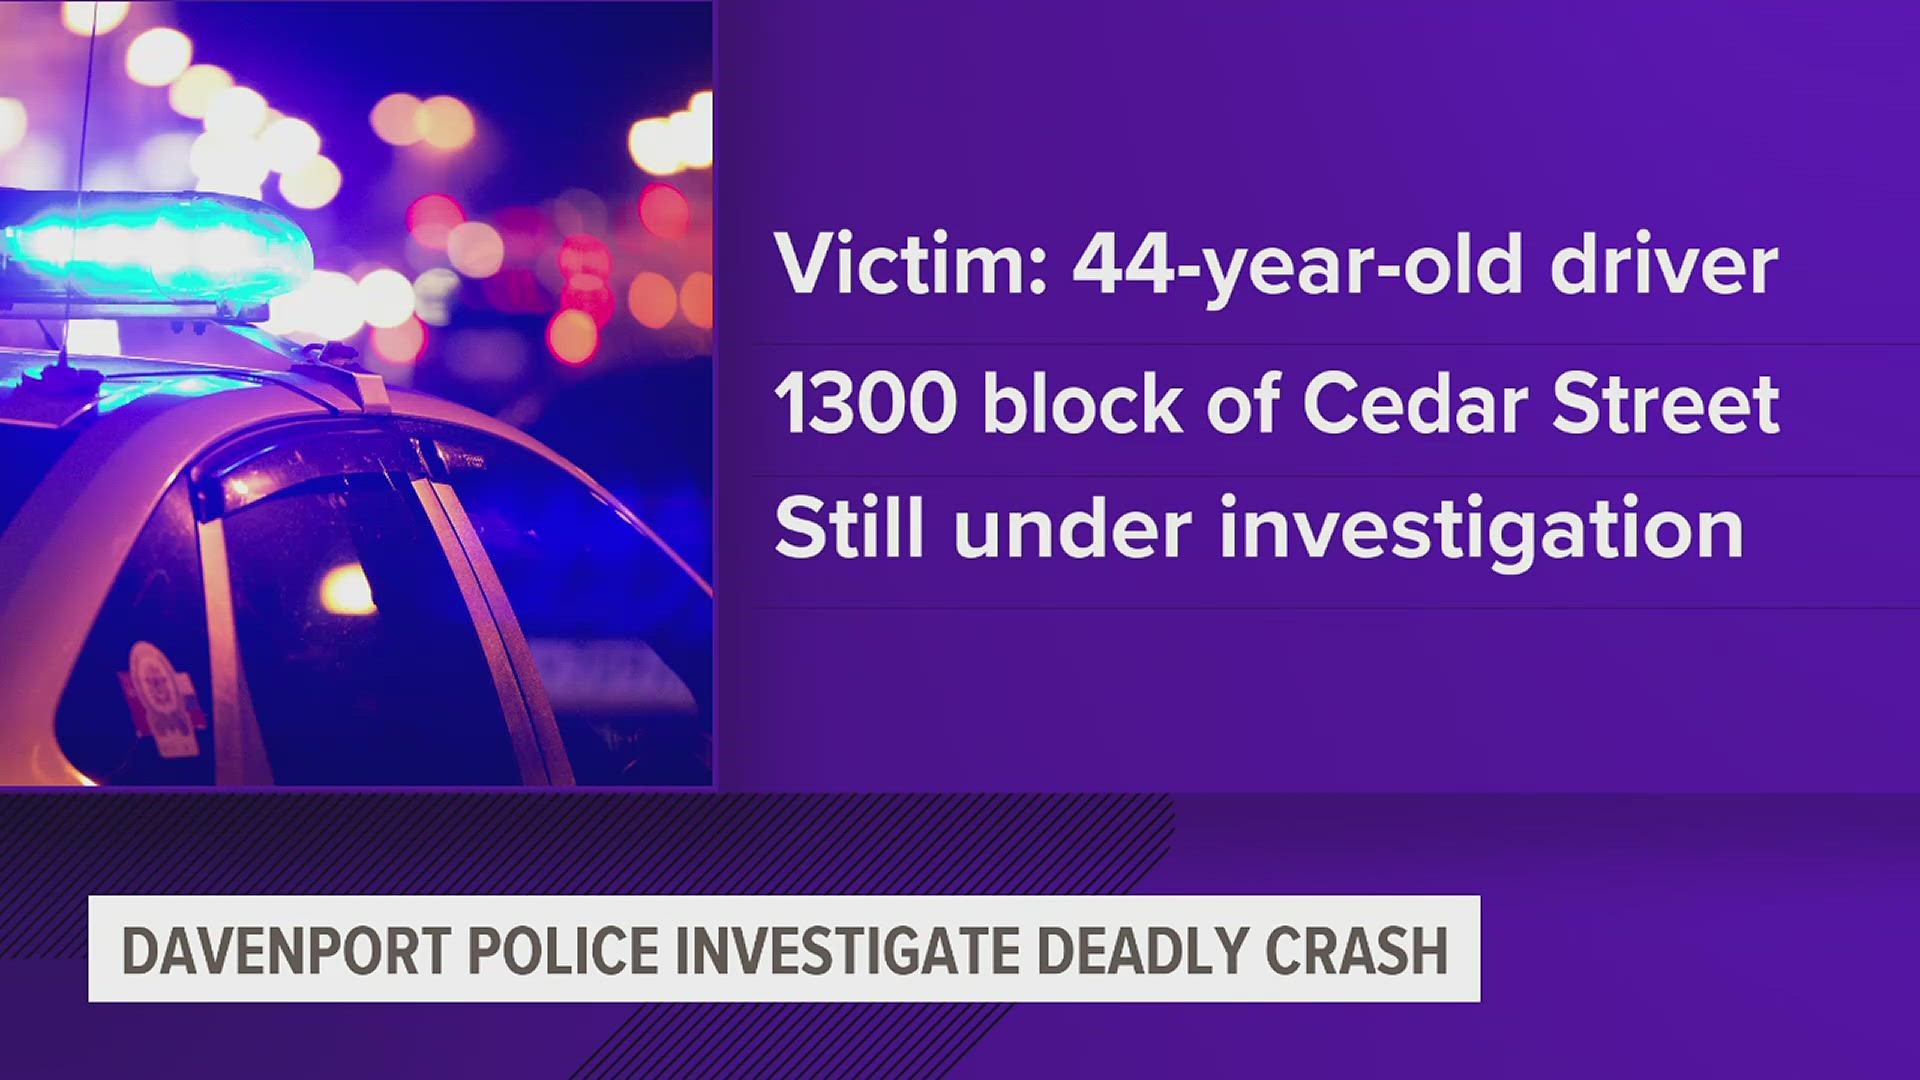 Police believe that the vehicle was traveling northbound on Cedar Street at a high speed. It subsequently left the roadway and struck a tree, leaving one person dead